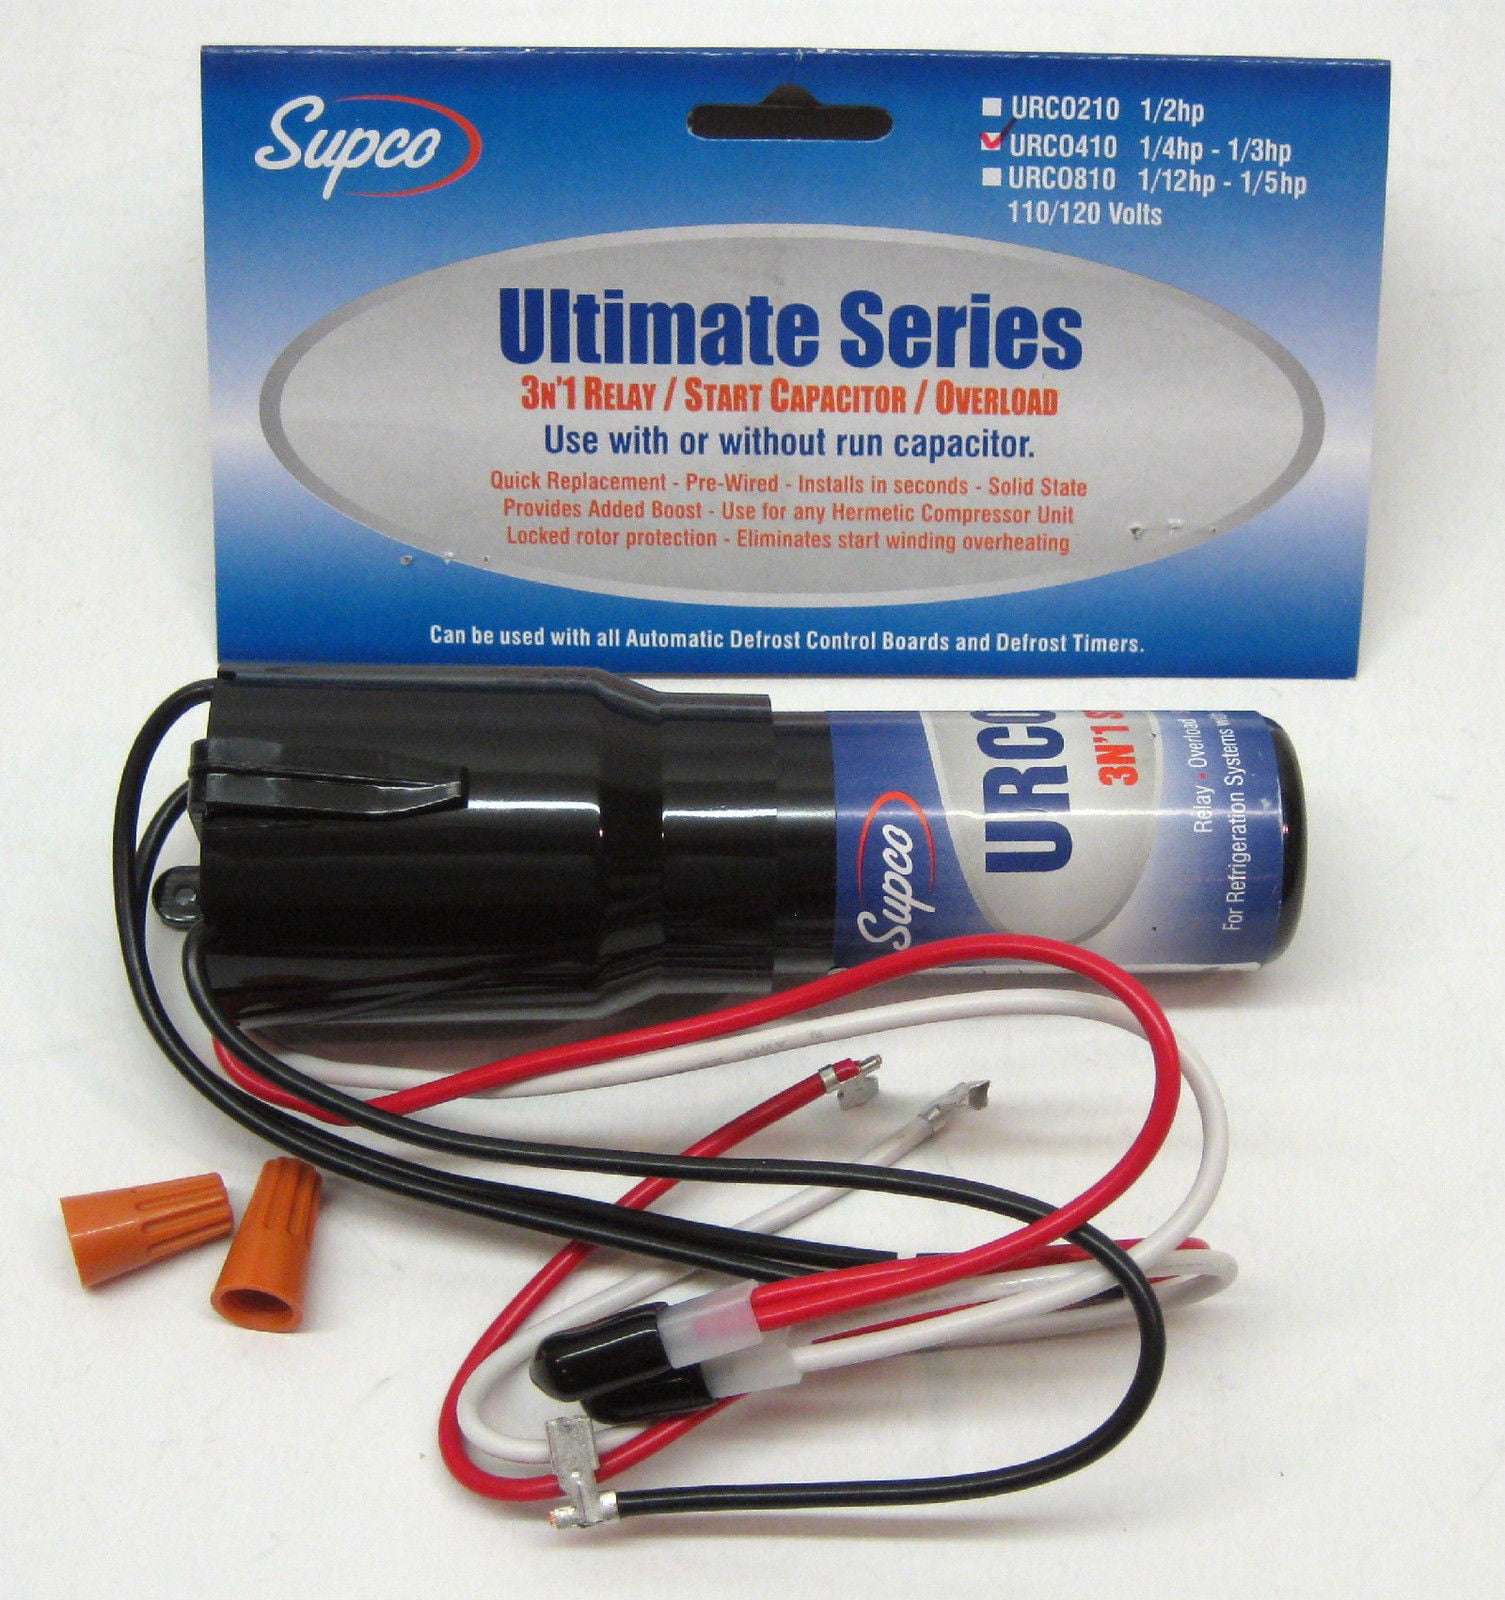 Supco URCO410 Relay Overload Capacitor